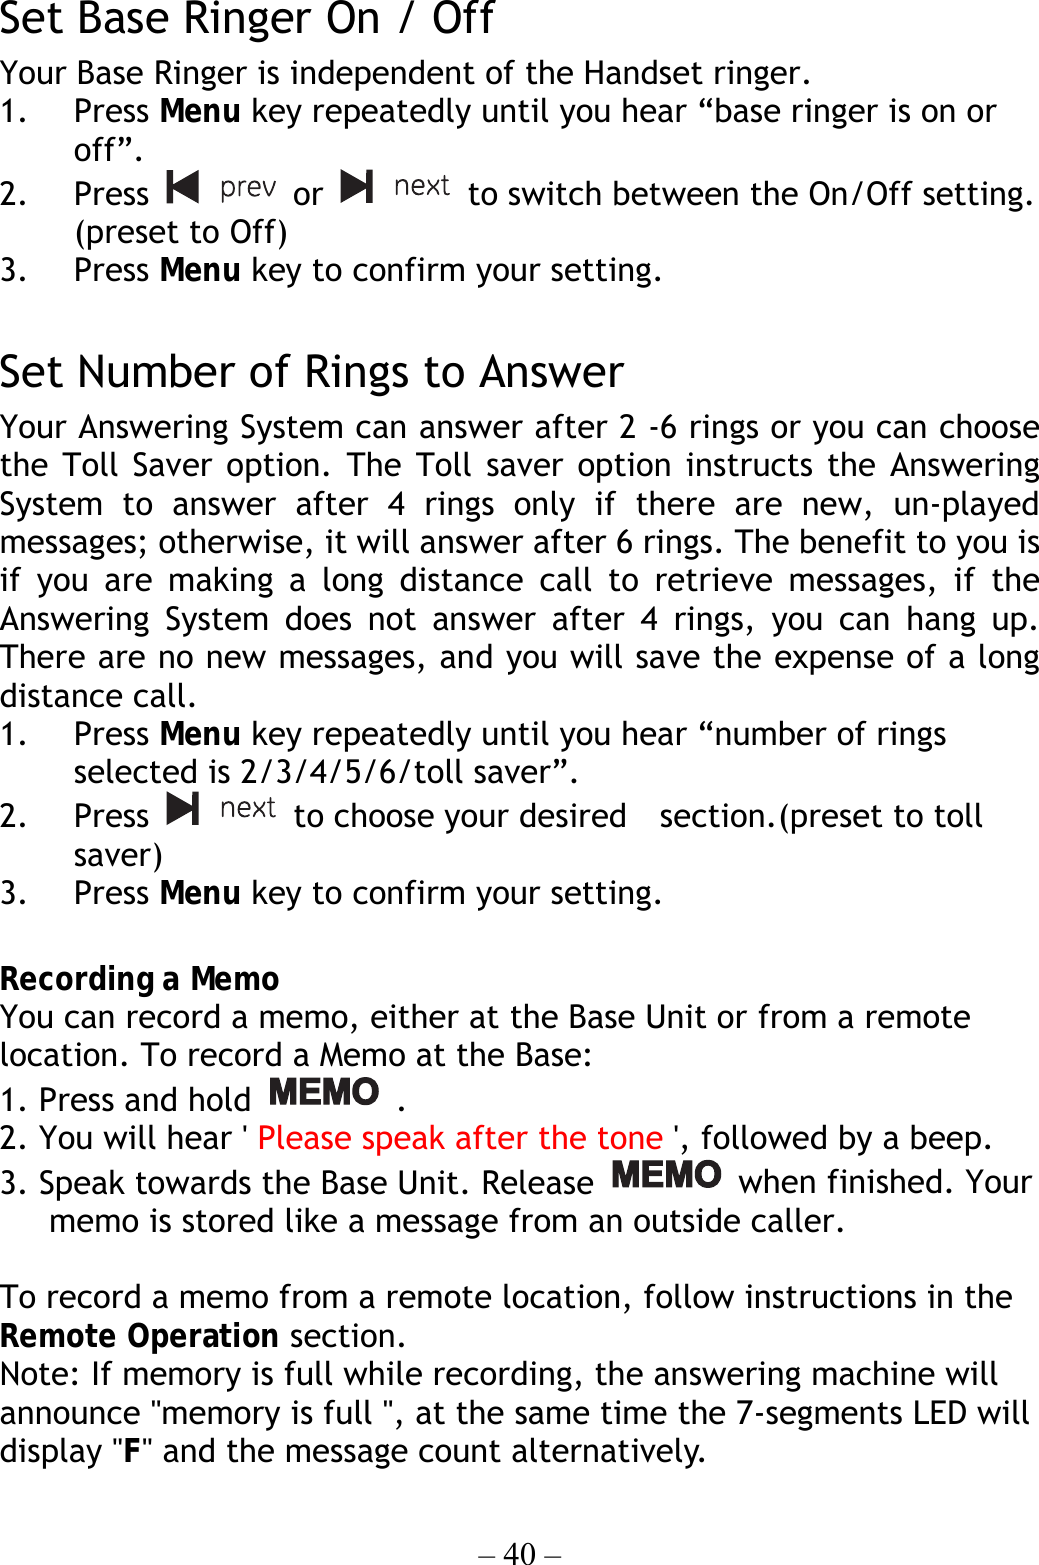 – 40 –  Set Base Ringer On / Off   Your Base Ringer is independent of the Handset ringer.   1. Press Menu key repeatedly until you hear “base ringer is on or off”. 2. Press   or   to switch between the On/Off setting. (preset to Off) 3. Press Menu key to confirm your setting.  Set Number of Rings to Answer Your Answering System can answer after 2 -6 rings or you can choose the Toll Saver option. The Toll saver option instructs the Answering System to answer after 4 rings only if there are new, un-played messages; otherwise, it will answer after 6 rings. The benefit to you is if you are making a long distance call to retrieve messages, if the Answering System does not answer after 4 rings, you can hang up. There are no new messages, and you will save the expense of a long distance call. 1. Press Menu key repeatedly until you hear “number of rings selected is 2/3/4/5/6/toll saver”. 2. Press   to choose your desired    section.(preset to toll saver) 3. Press Menu key to confirm your setting.  Recording a Memo You can record a memo, either at the Base Unit or from a remote location. To record a Memo at the Base: 1. Press and hold   . 2. You will hear &apos; Please speak after the tone &apos;, followed by a beep. 3. Speak towards the Base Unit. Release   when finished. Your memo is stored like a message from an outside caller.  To record a memo from a remote location, follow instructions in the Remote Operation section. Note: If memory is full while recording, the answering machine will announce &quot;memory is full &quot;, at the same time the 7-segments LED will display &quot;F&quot; and the message count alternatively. 